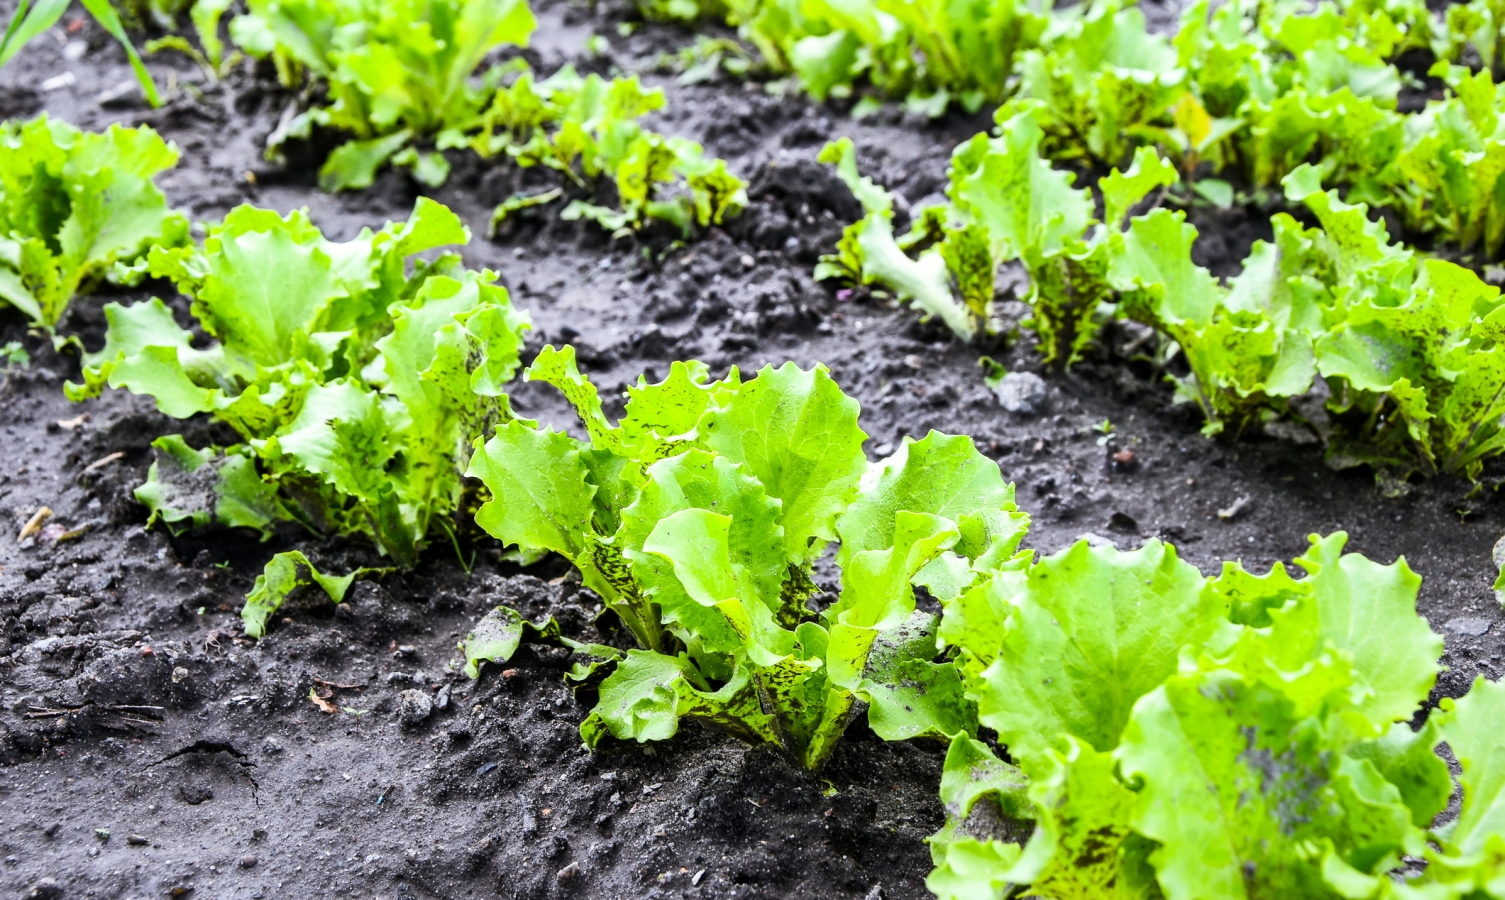 Fresh salad leave Green oak in the Organic farm, selective focus, Young bright green lettuce salad growing in rocky ground.